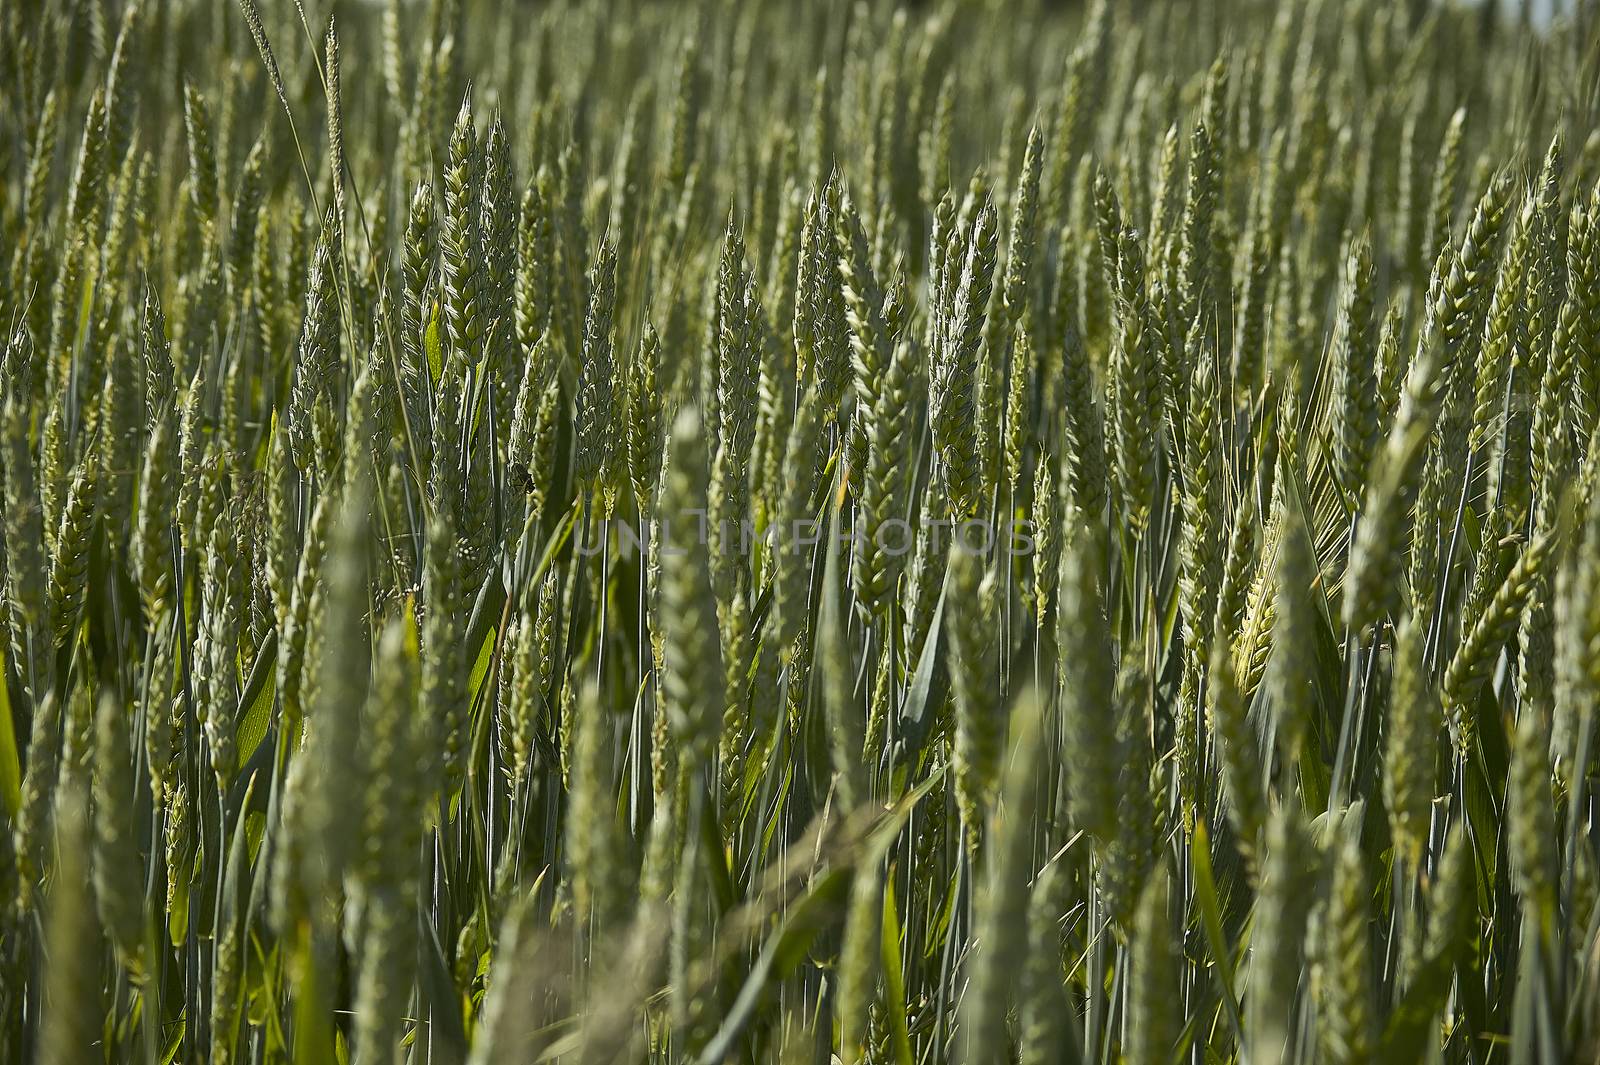 Ears of barley in a field of cultivation, agriculture in italy. Texture of barley